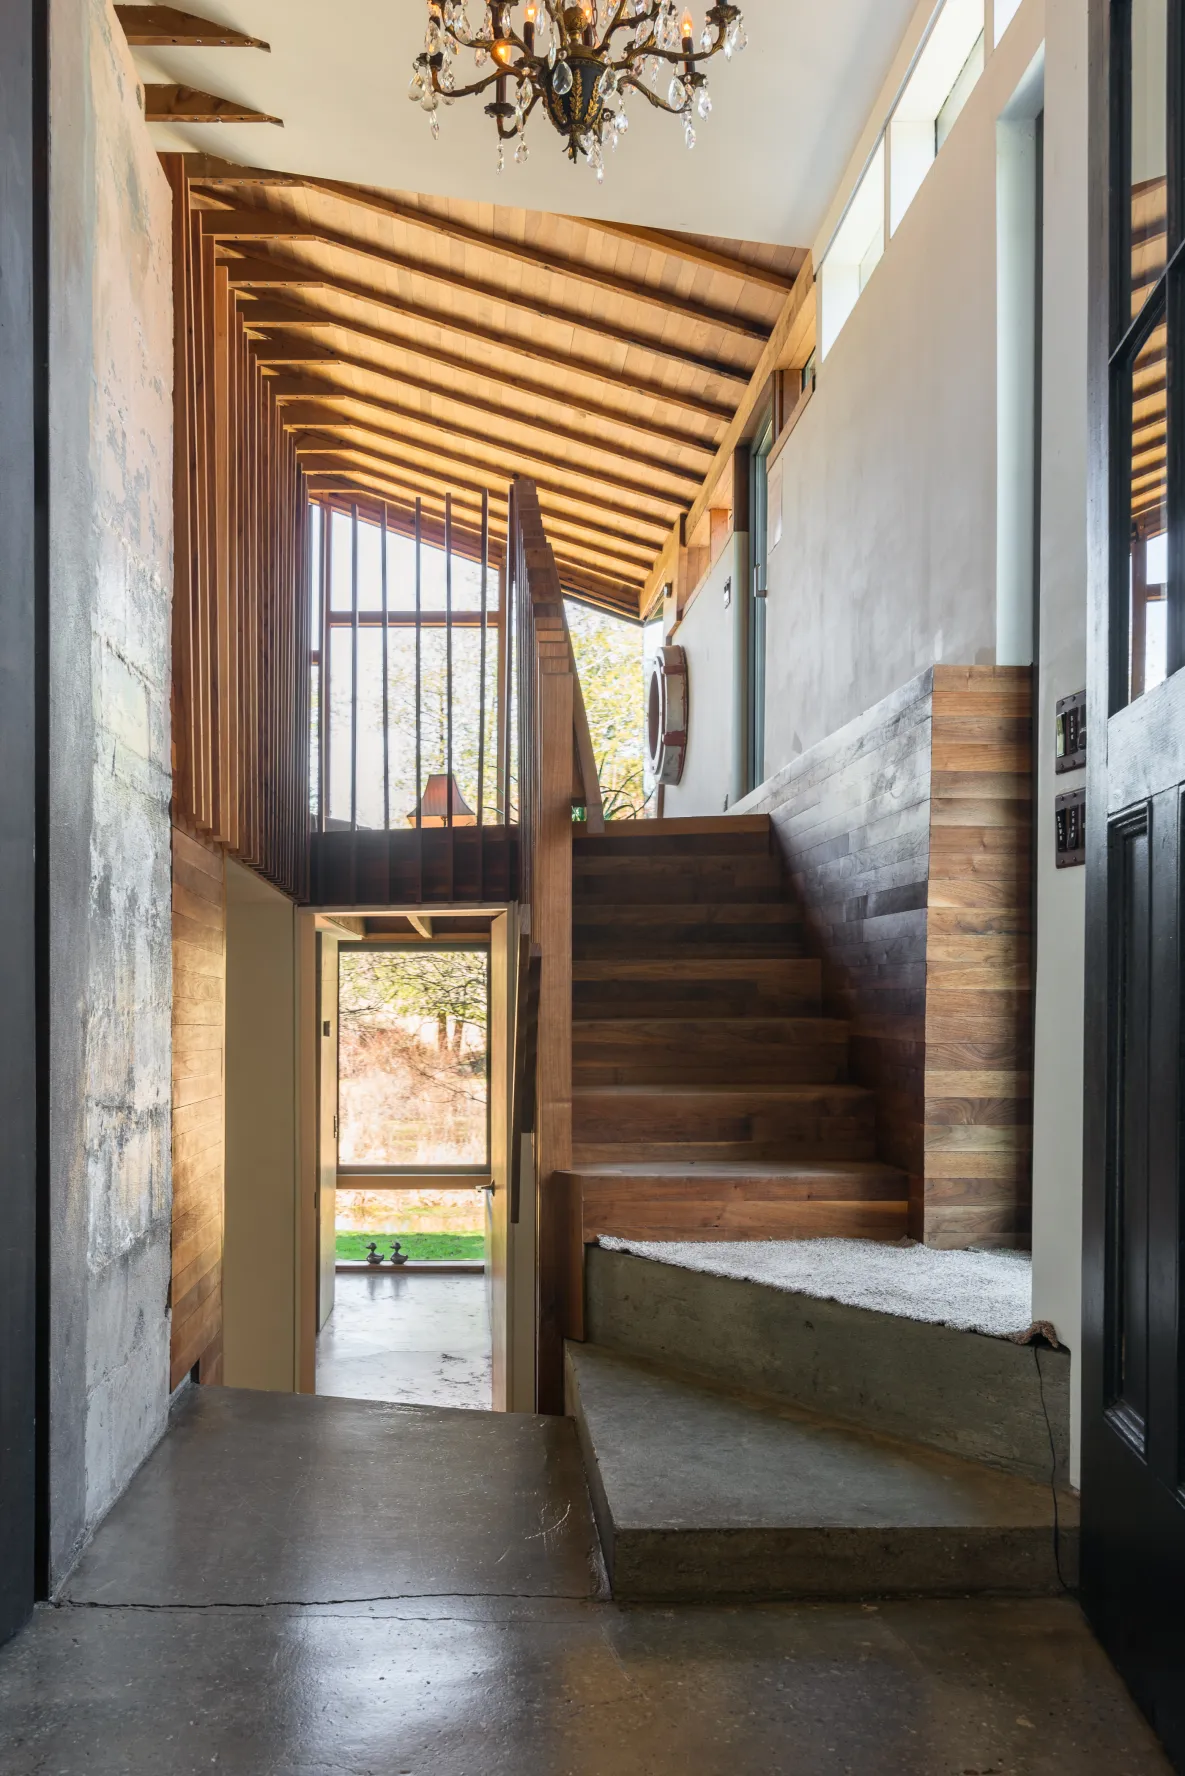 Interior shot of The Pond House post-renovation, showing an airy and modern hallway with wooden steps and an exposed beam ceiling.